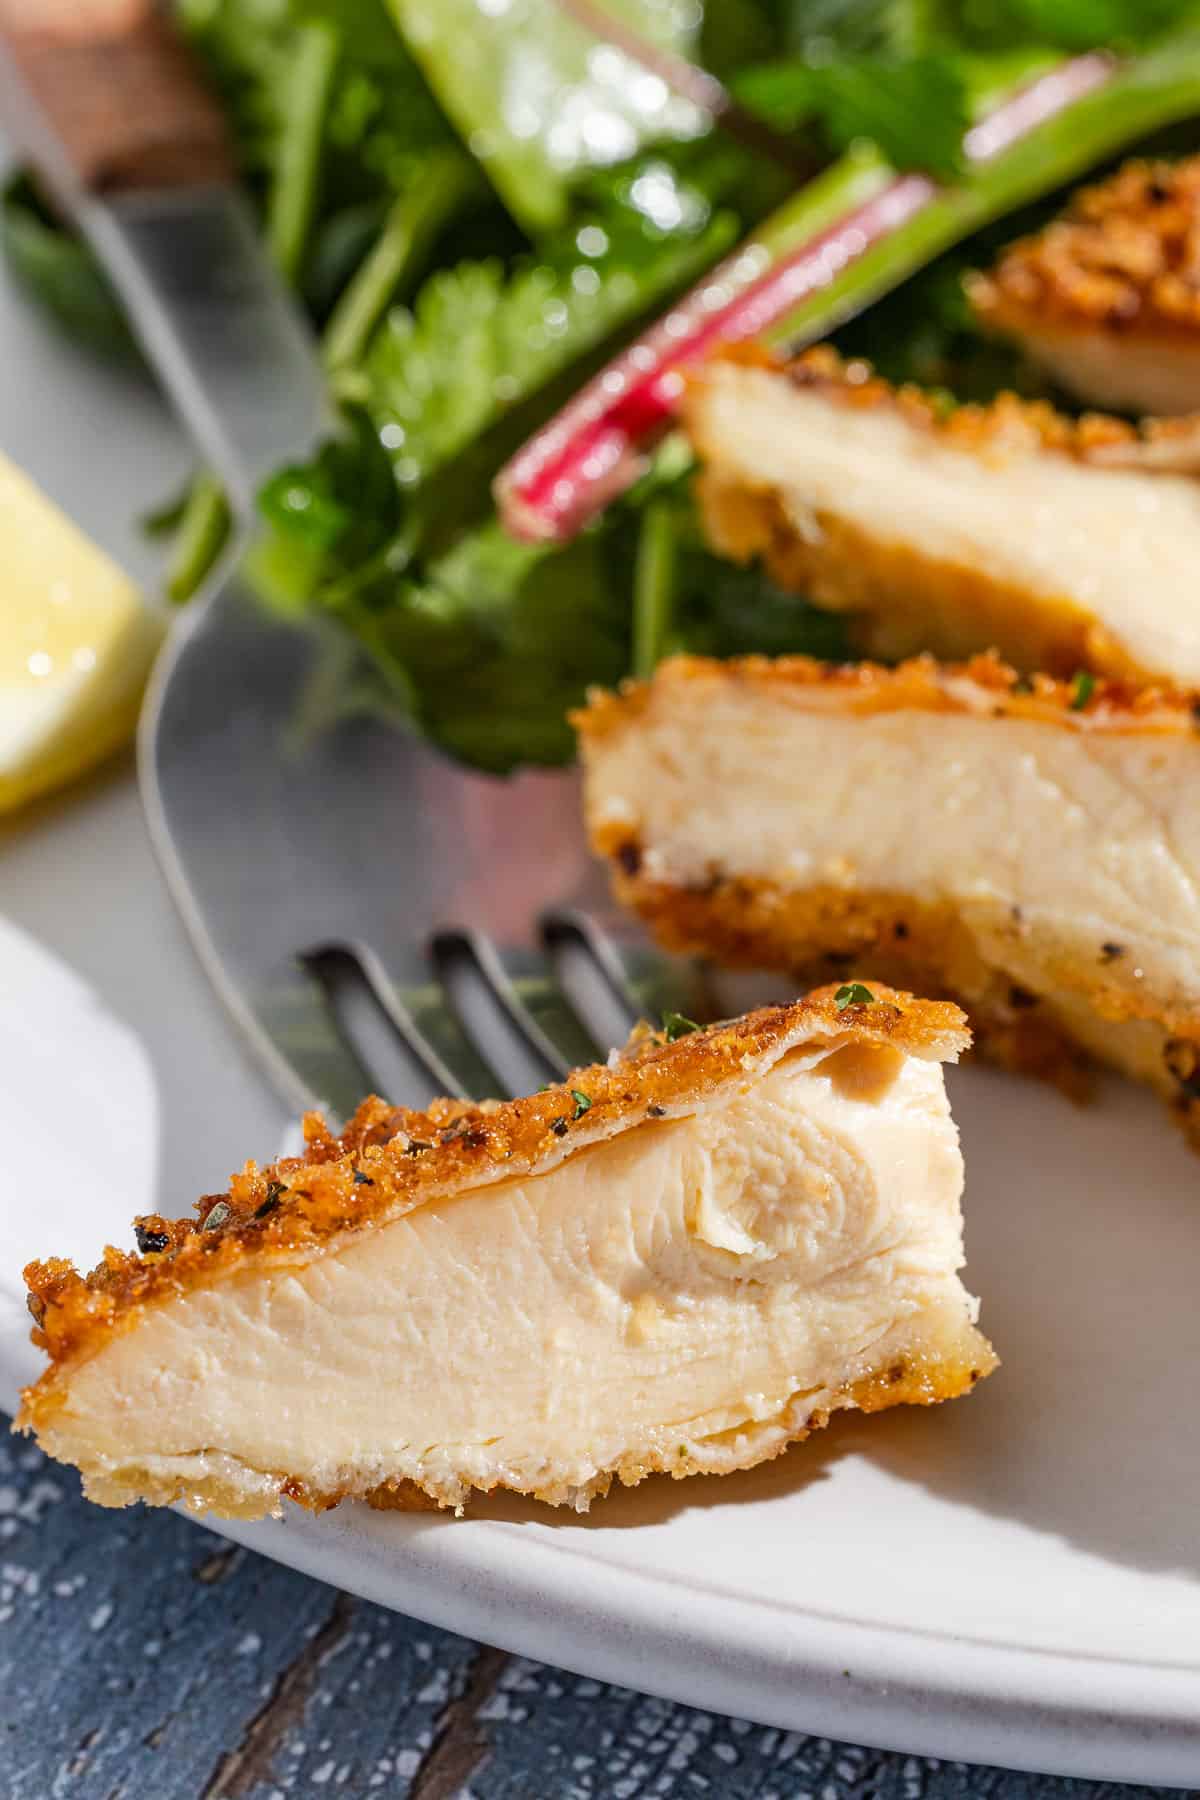 A close up of a sliced chicken cutlet on a plate with a fork.